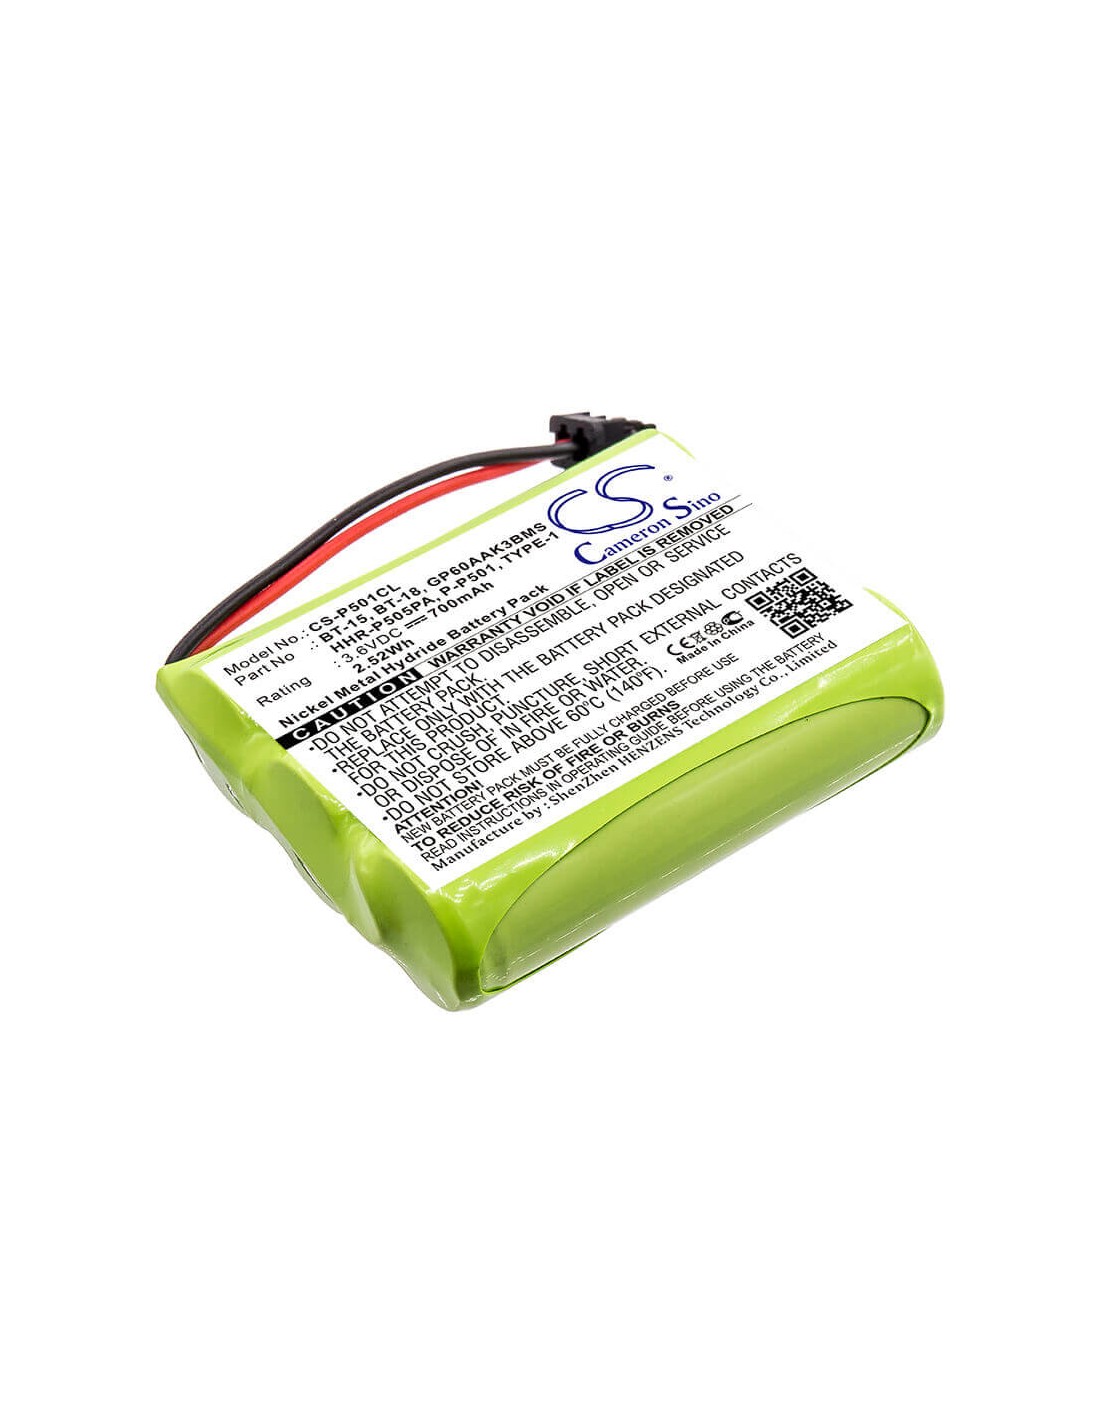 Battery for Sharp, 3600, Cl100w, Cl200, Cl300, 3.6V, 700mAh - 2.52Wh